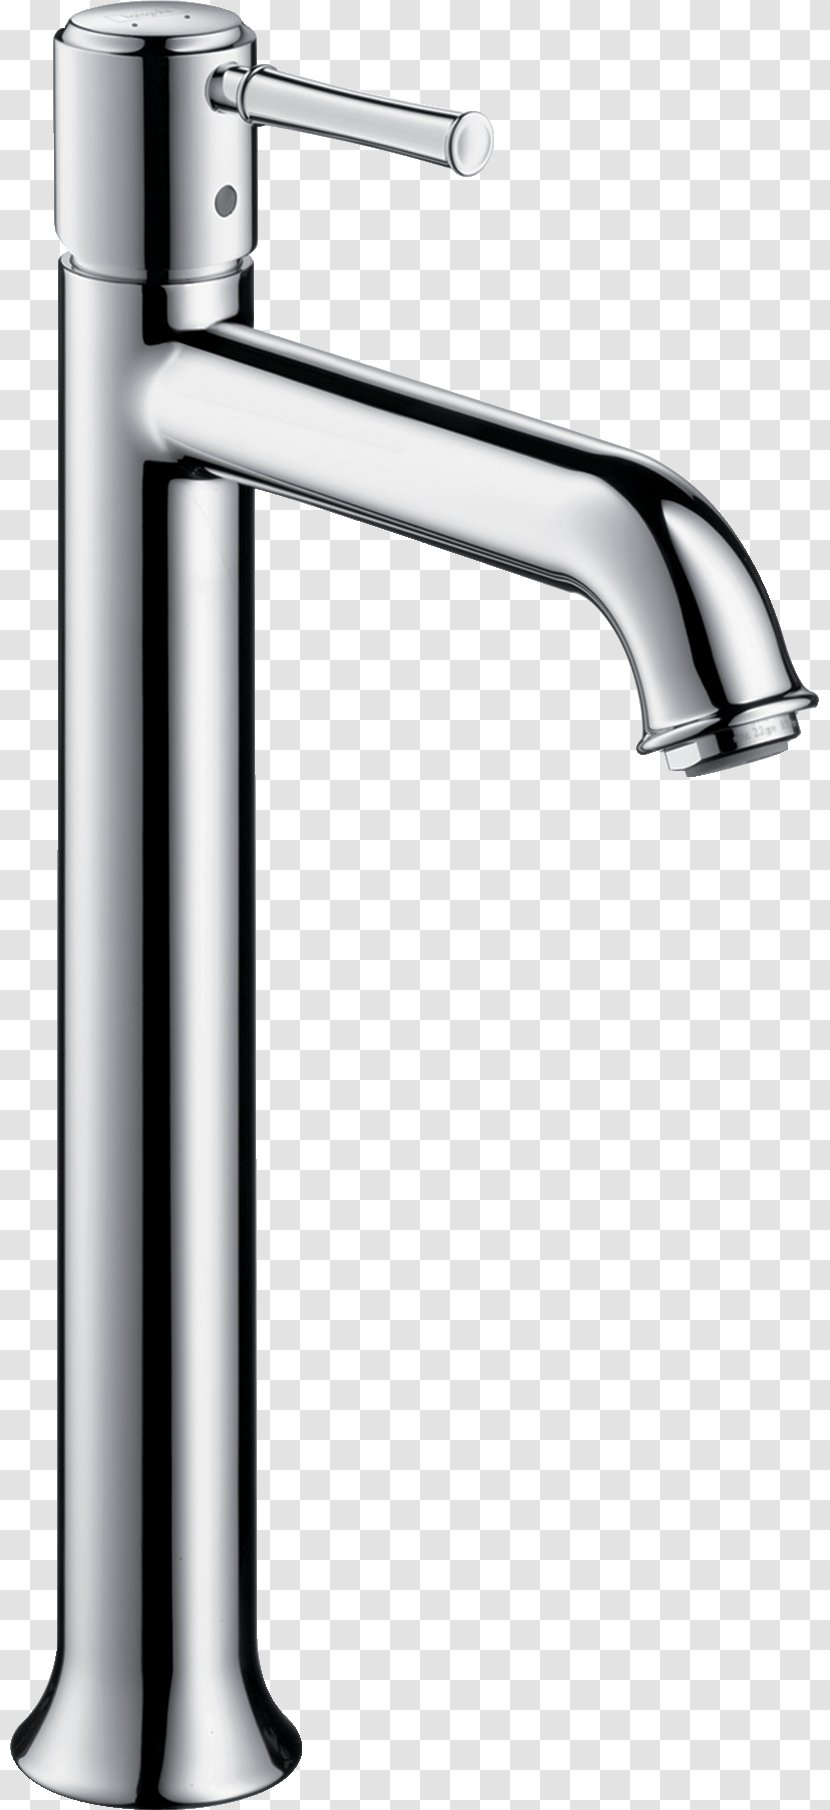 Tap Hansgrohe Sink Thermostatic Mixing Valve Bathroom Transparent PNG